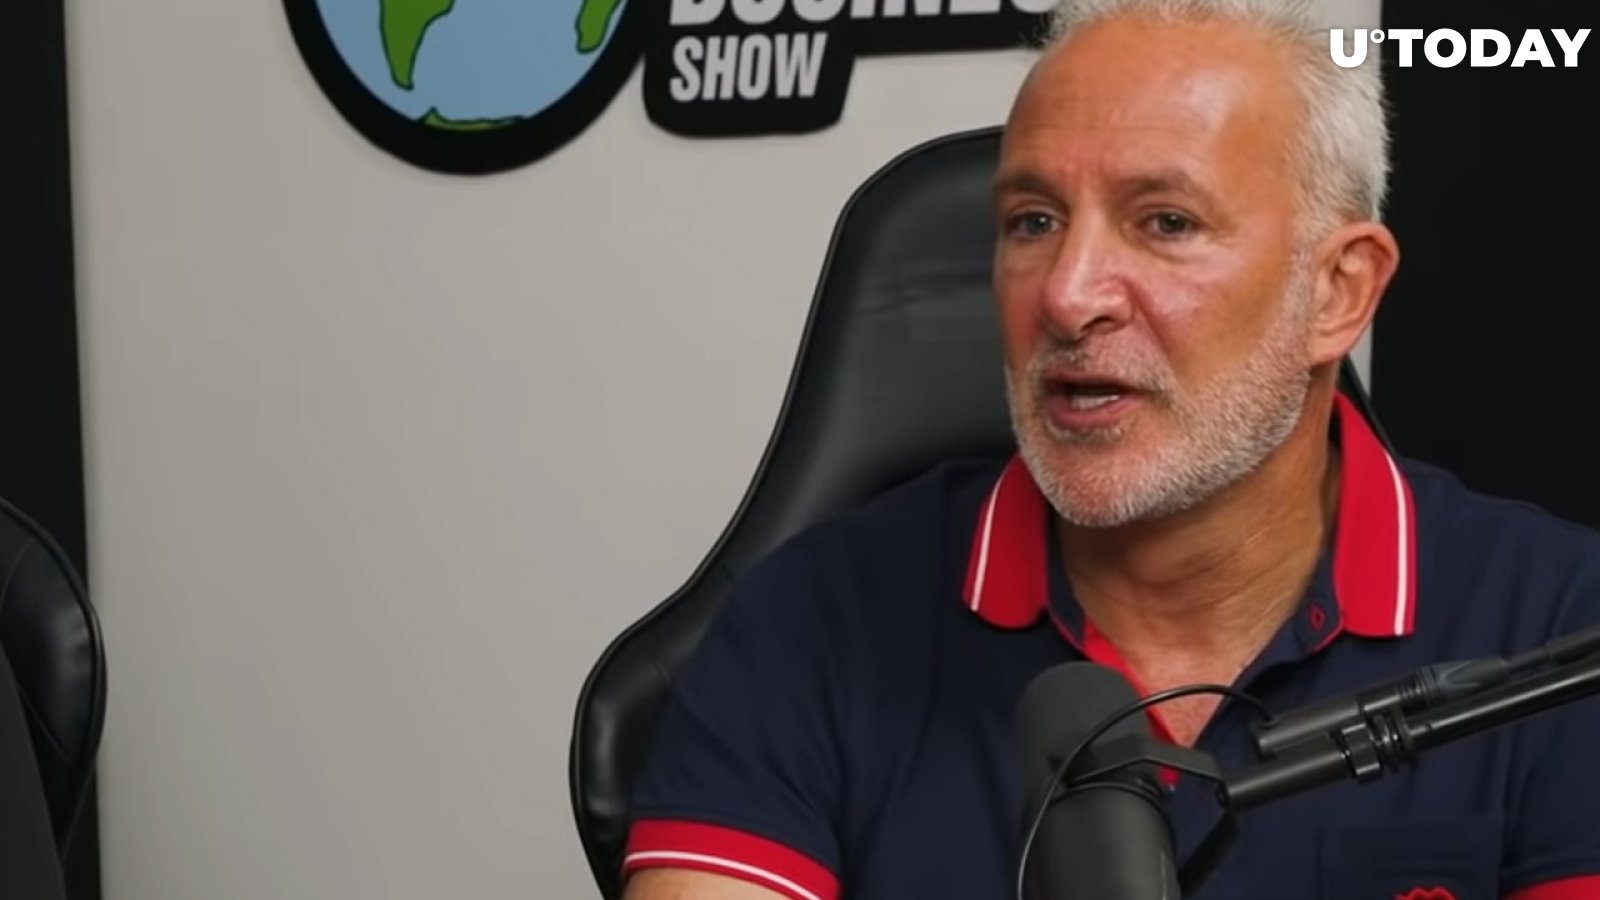 Fund Manager and Investor Peter Schiff Names "Carnage Indicator" for Bitcoin and Cryptocurrency Market